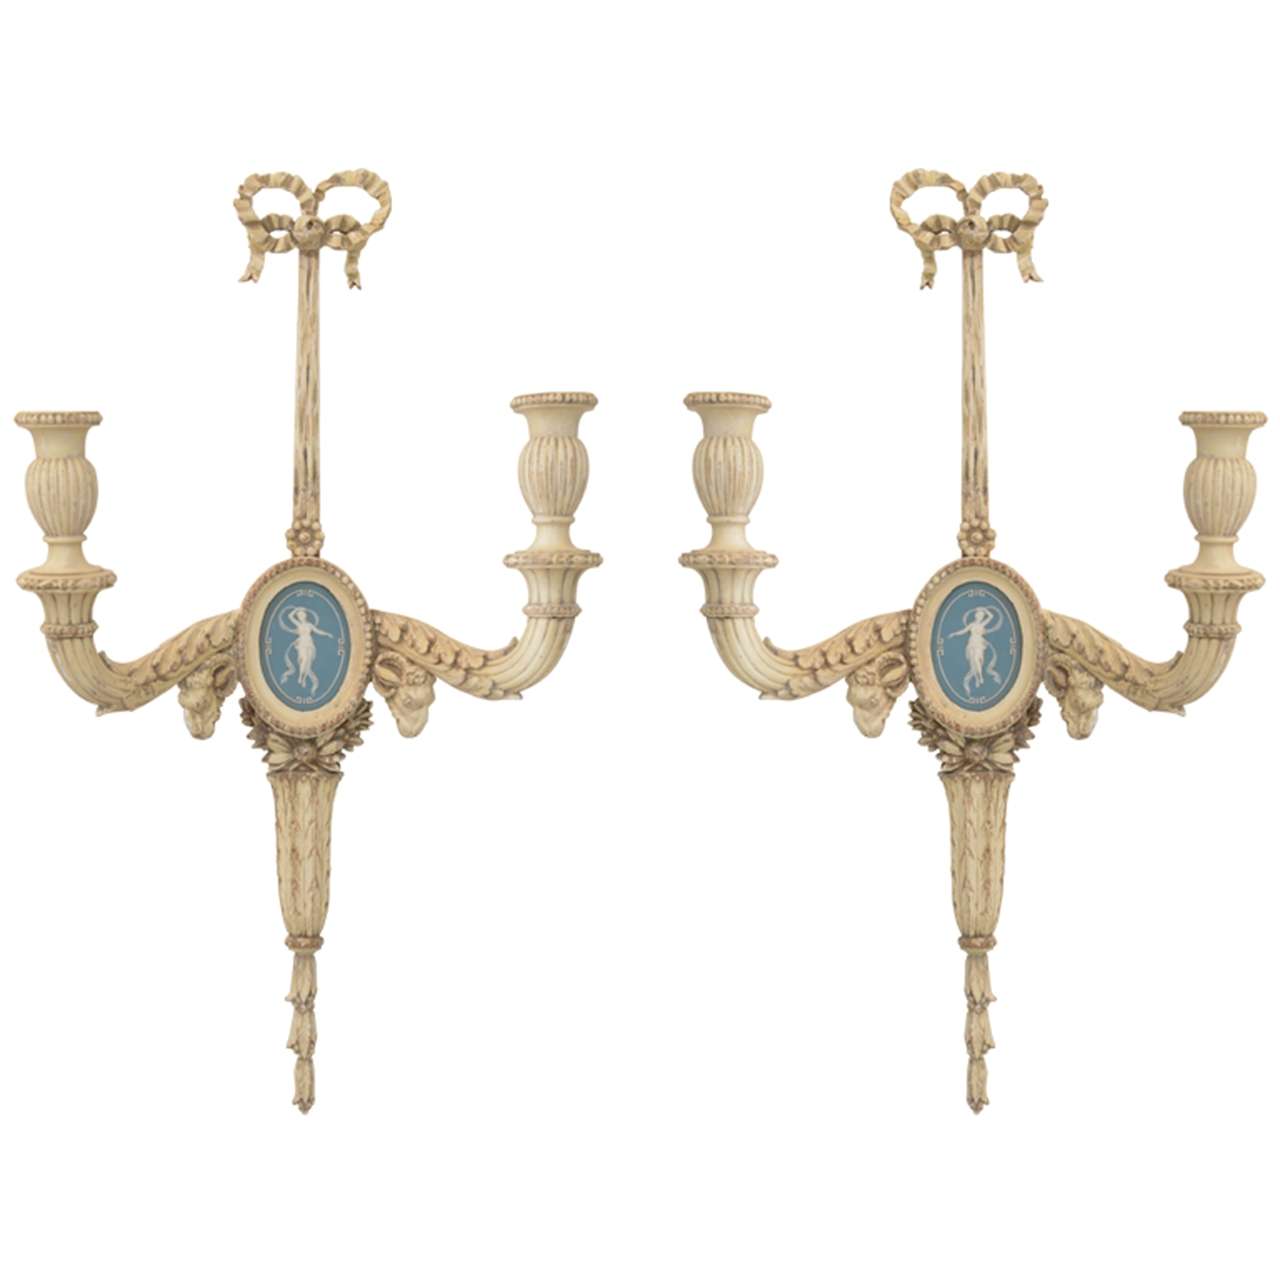 Pair of 19c. Carved Wood Sconces Centered by Wedgewood Bisque Plaques.